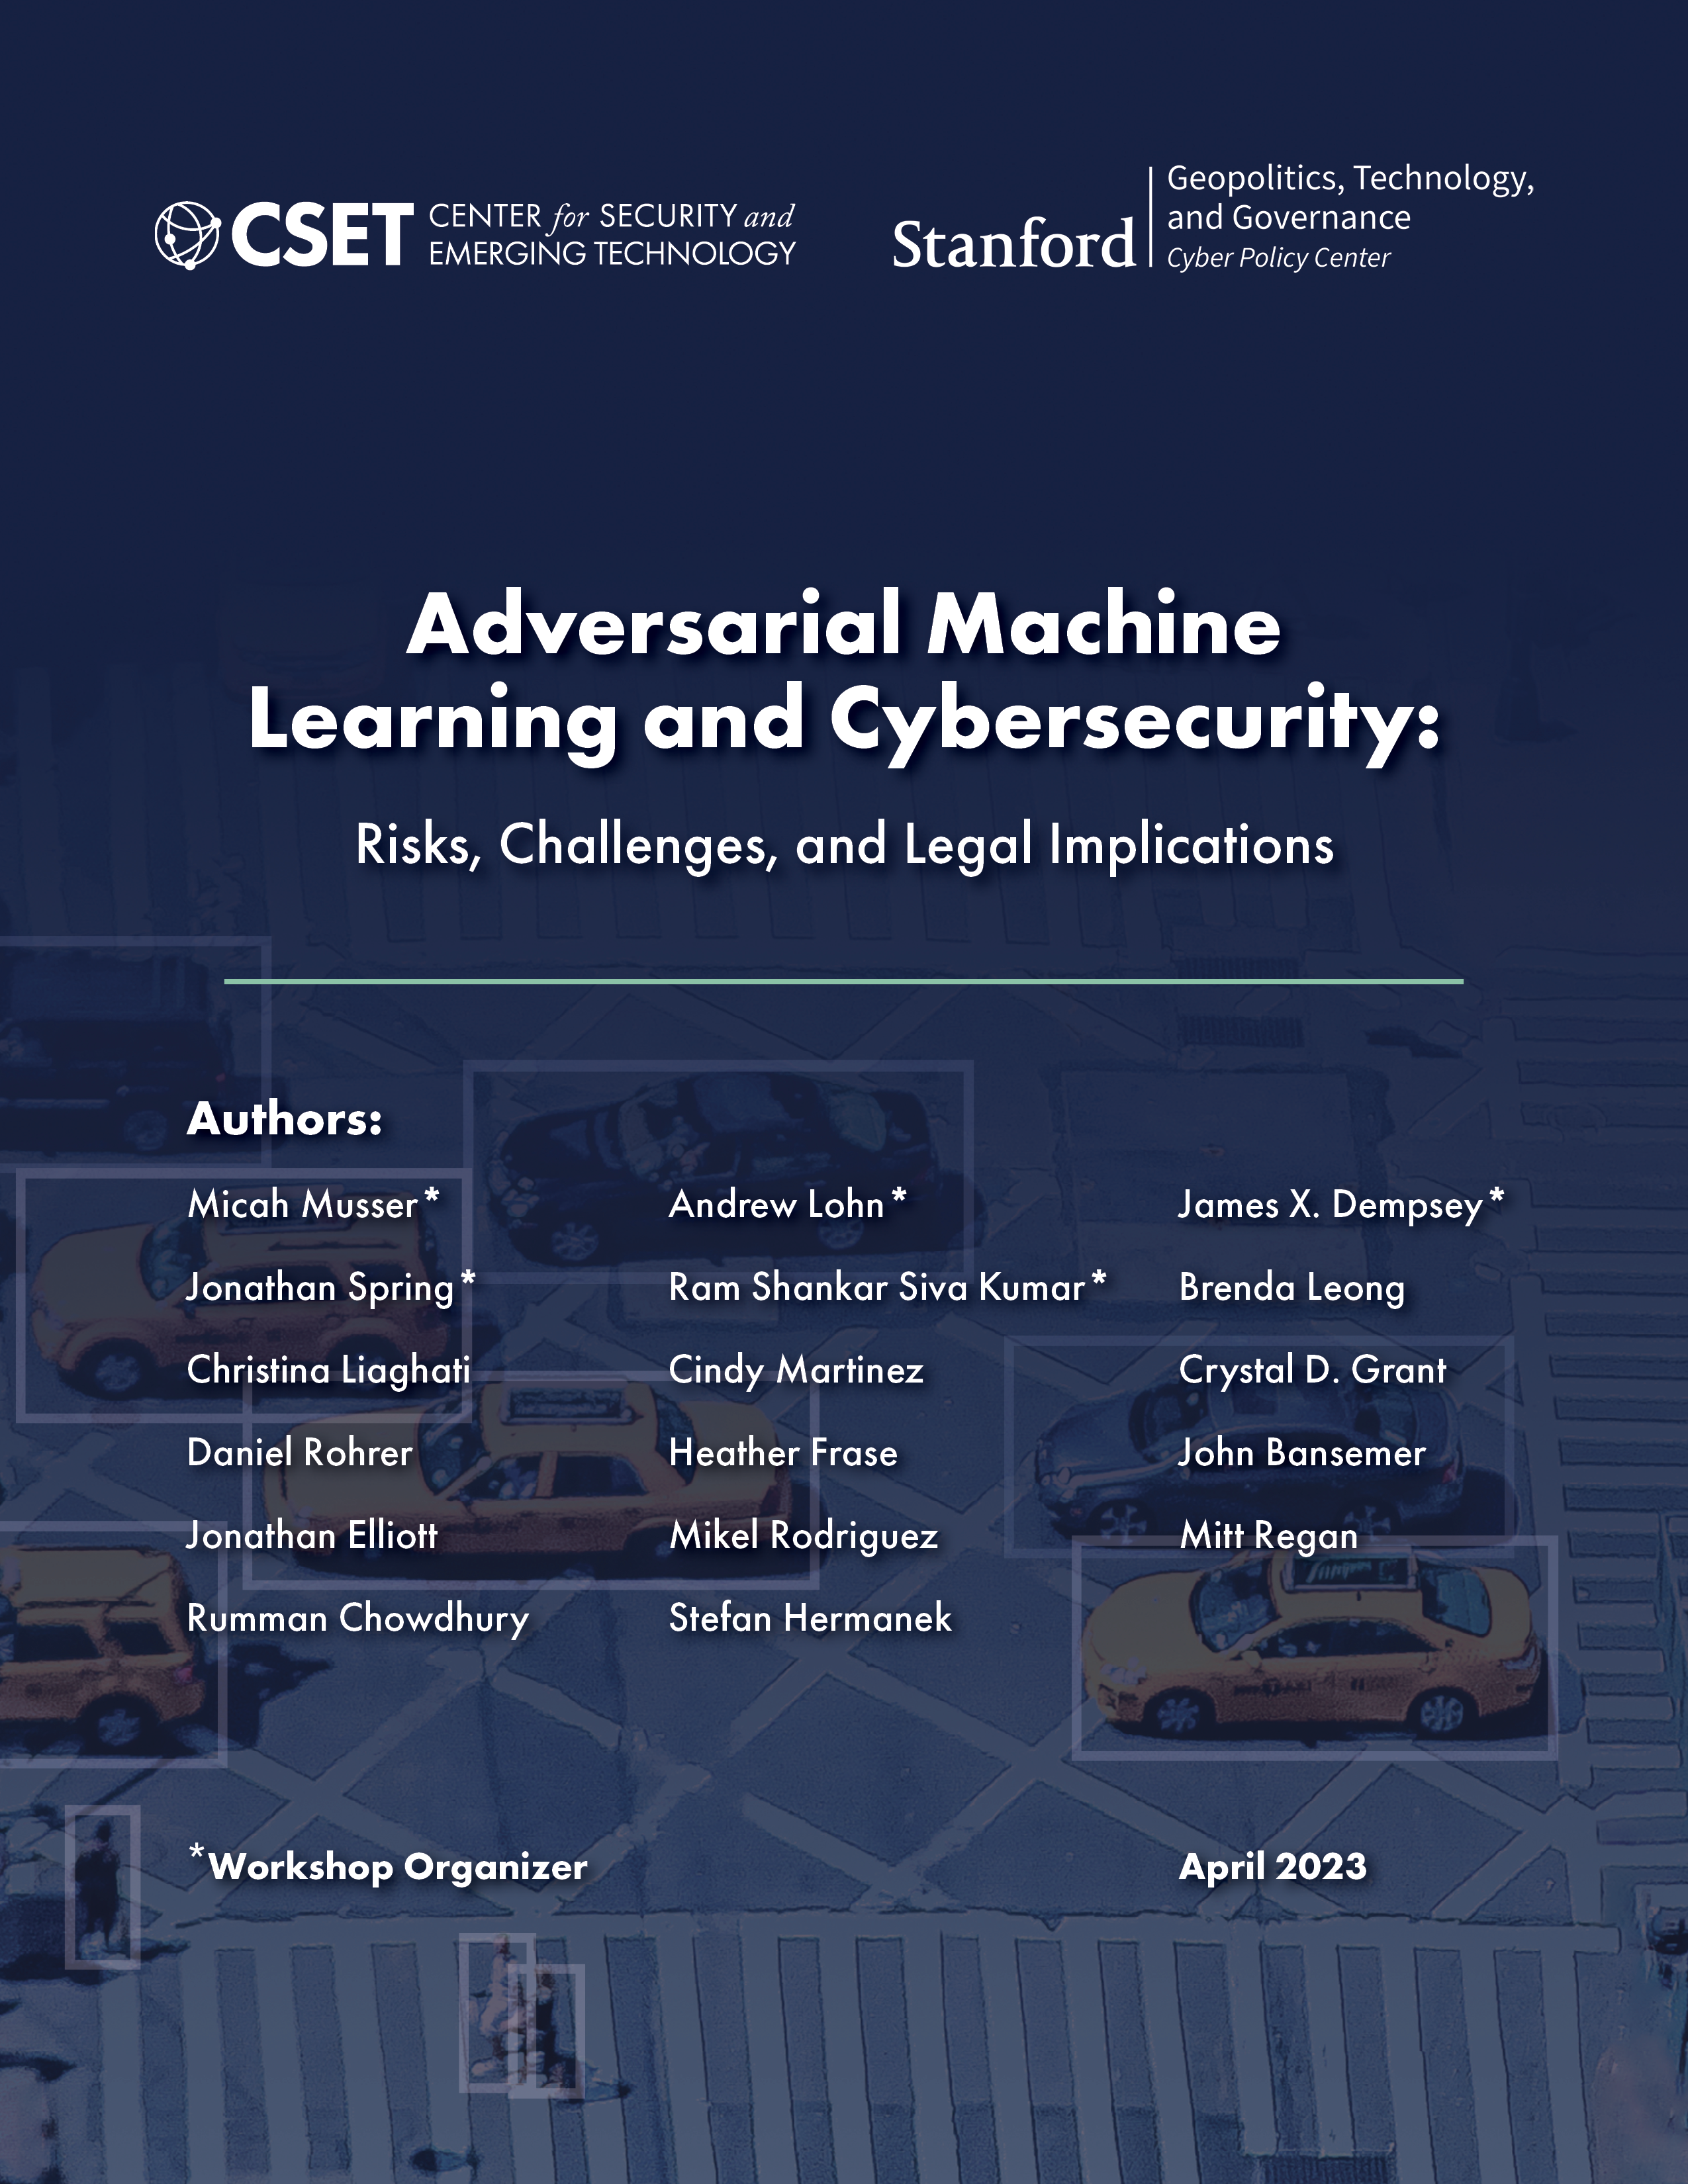 Adversarial Machine Learning and Cybersecurity: Risks, Challenges, and Legal Implications